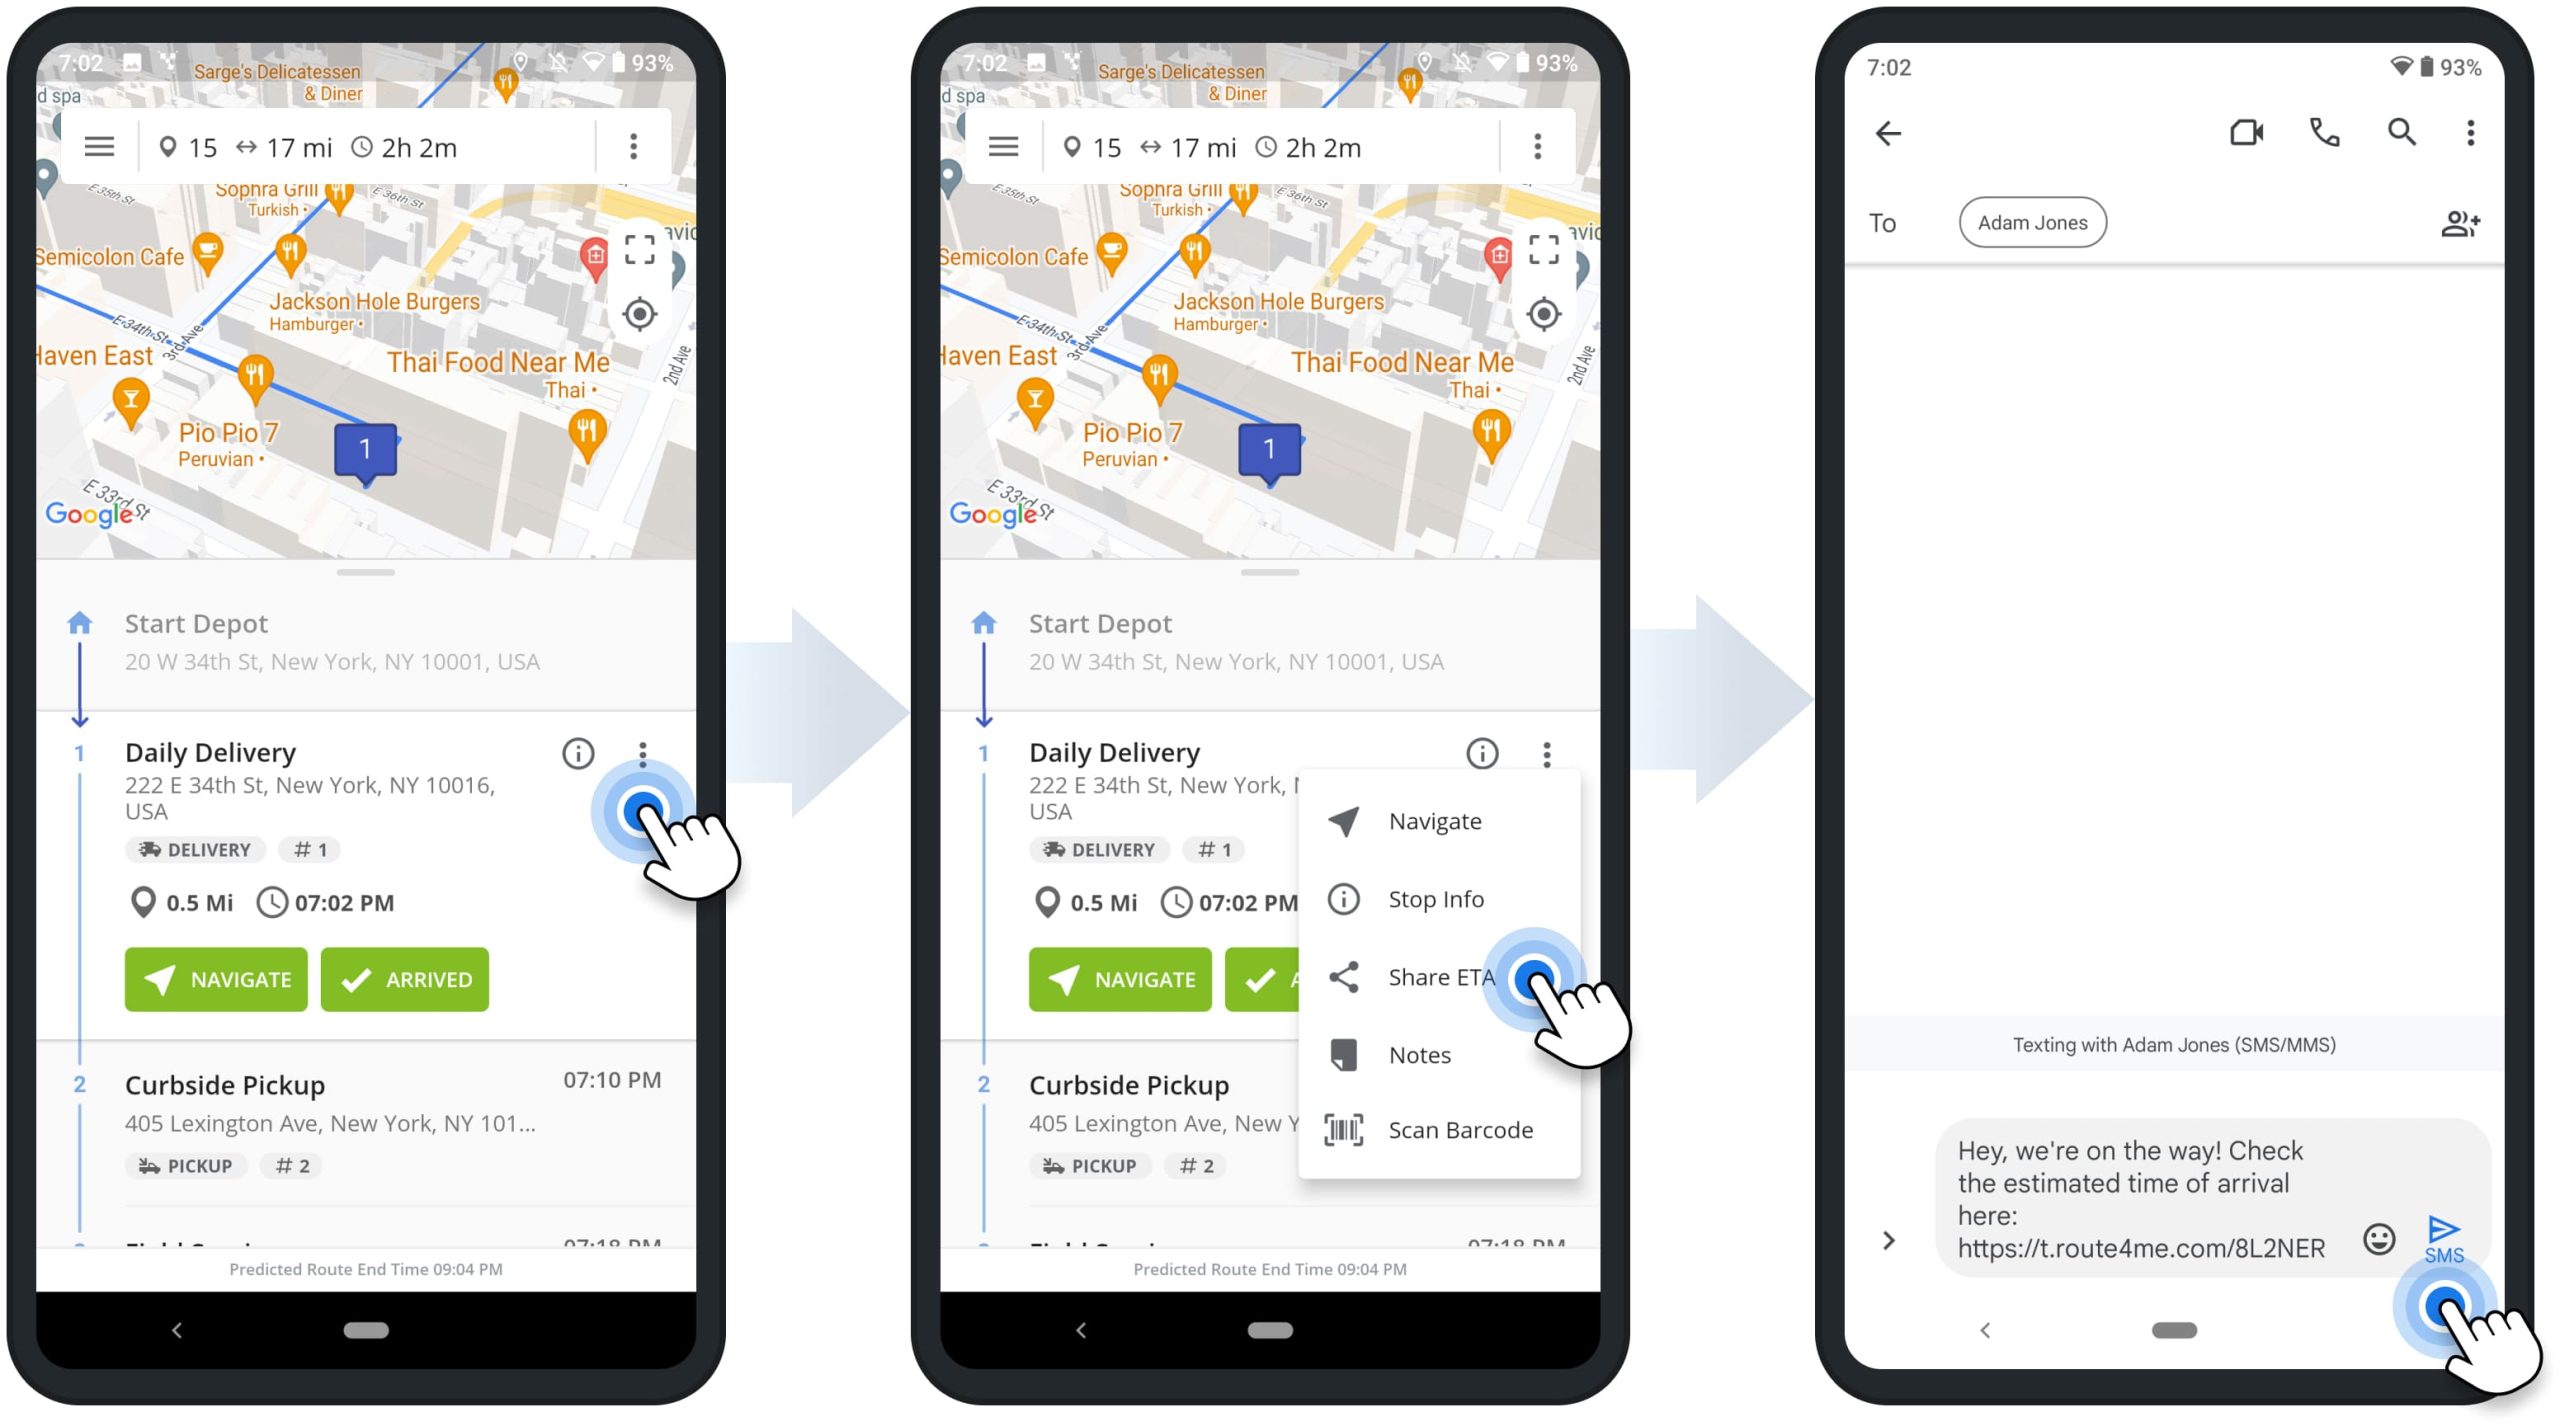 Share route stop estimated time of arrival (ETA) with customers via SMS from the Android Route Planner app for delivery drivers, field service, and sales.